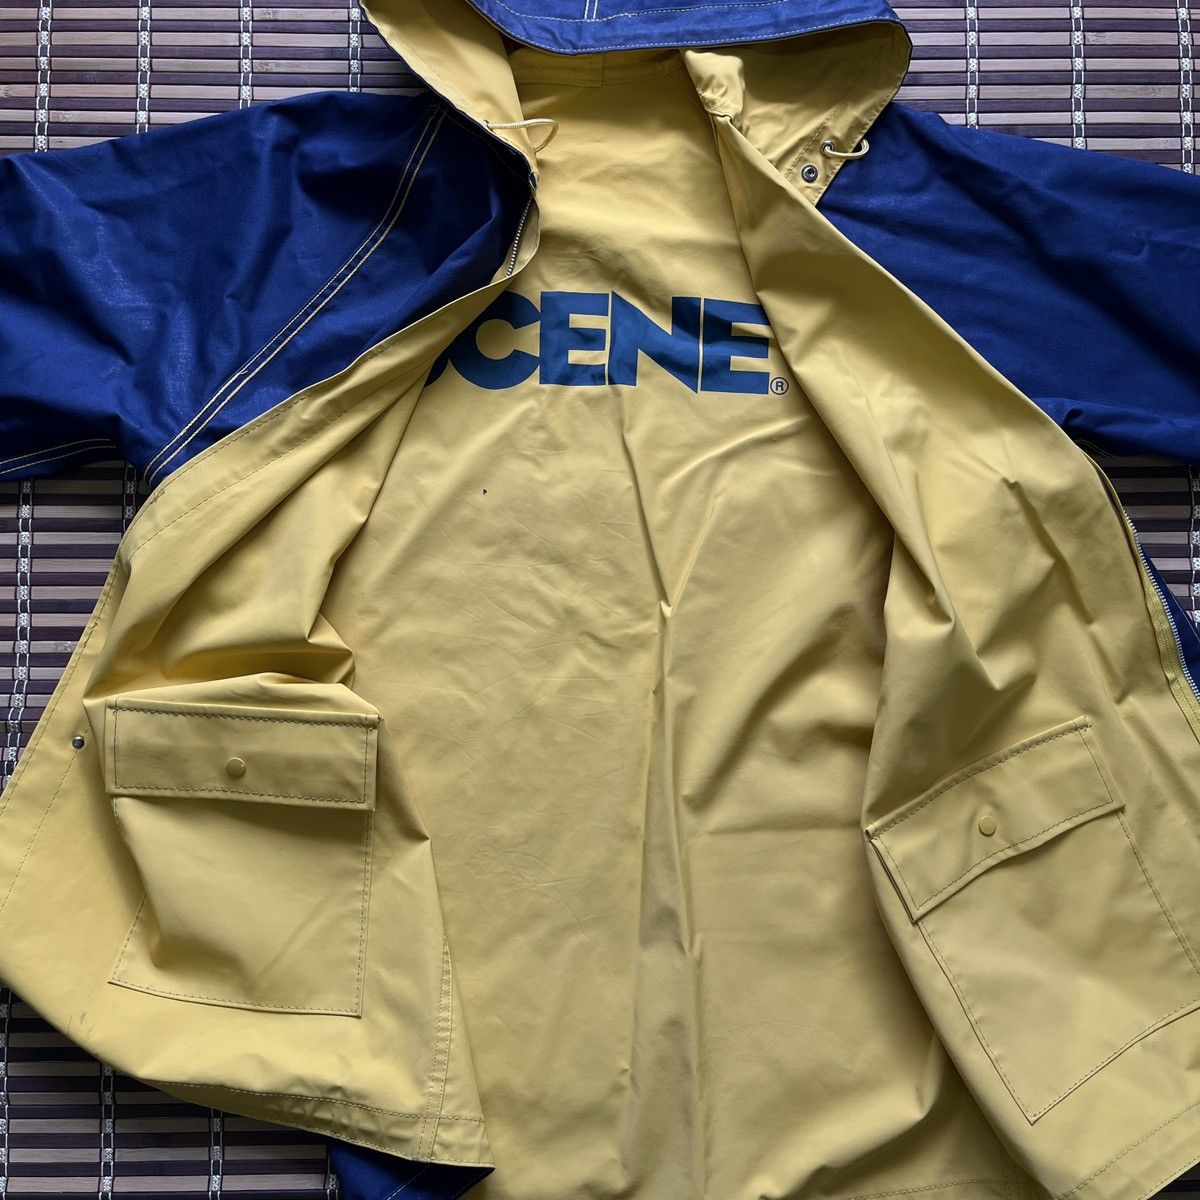 Outdoor Style Go Out! - Scene Reversible USA Parka Waterproof Jacket - 18